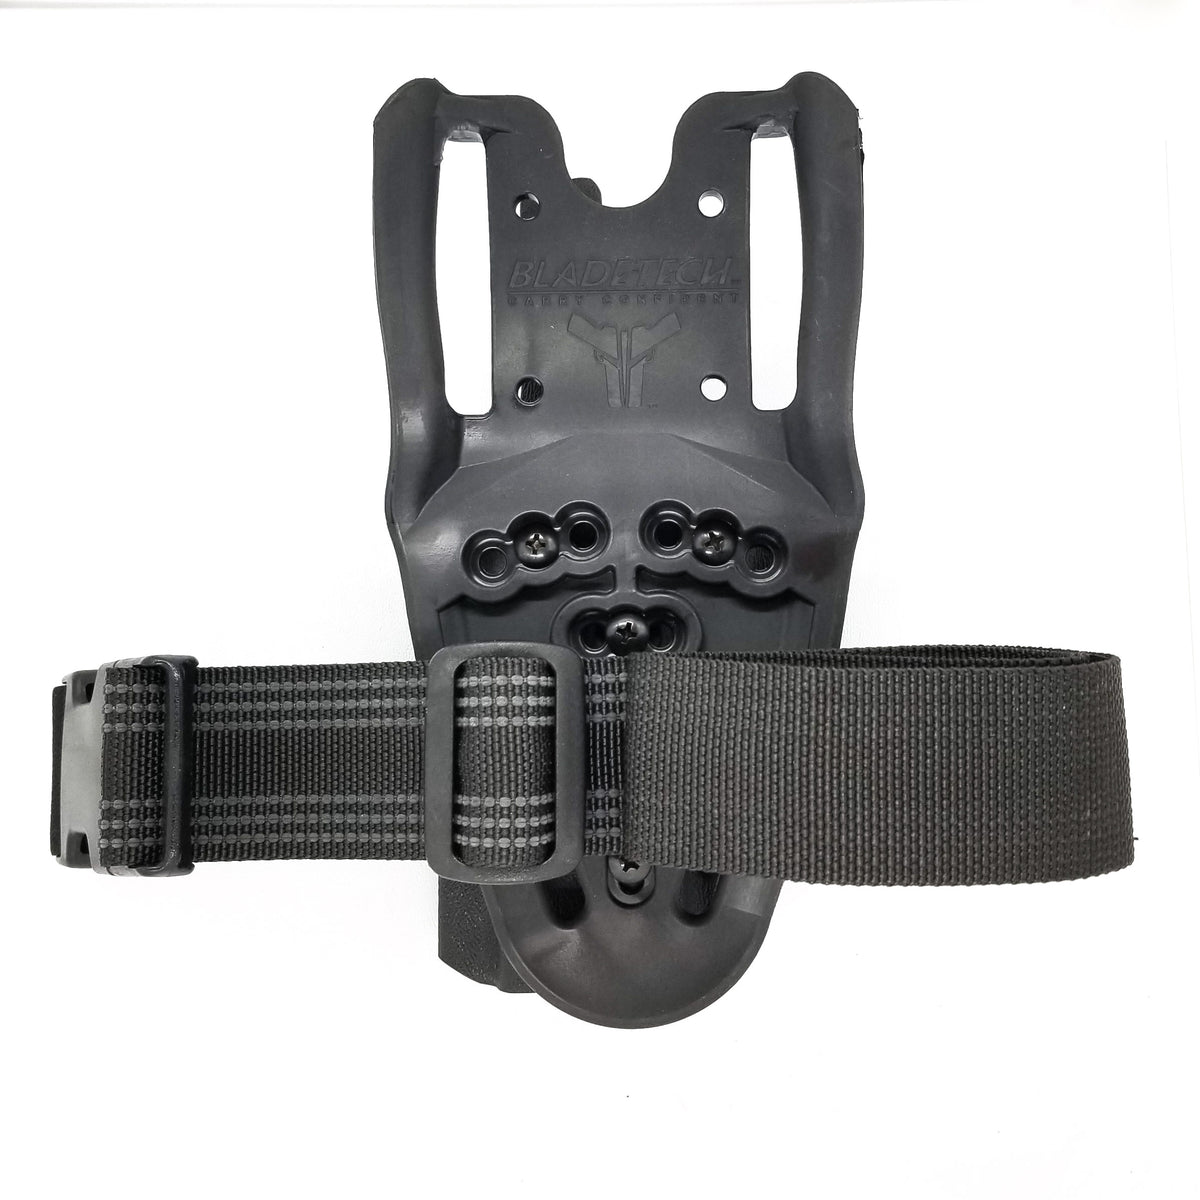 Glock 17/22 Competition Holster – Four Brothers